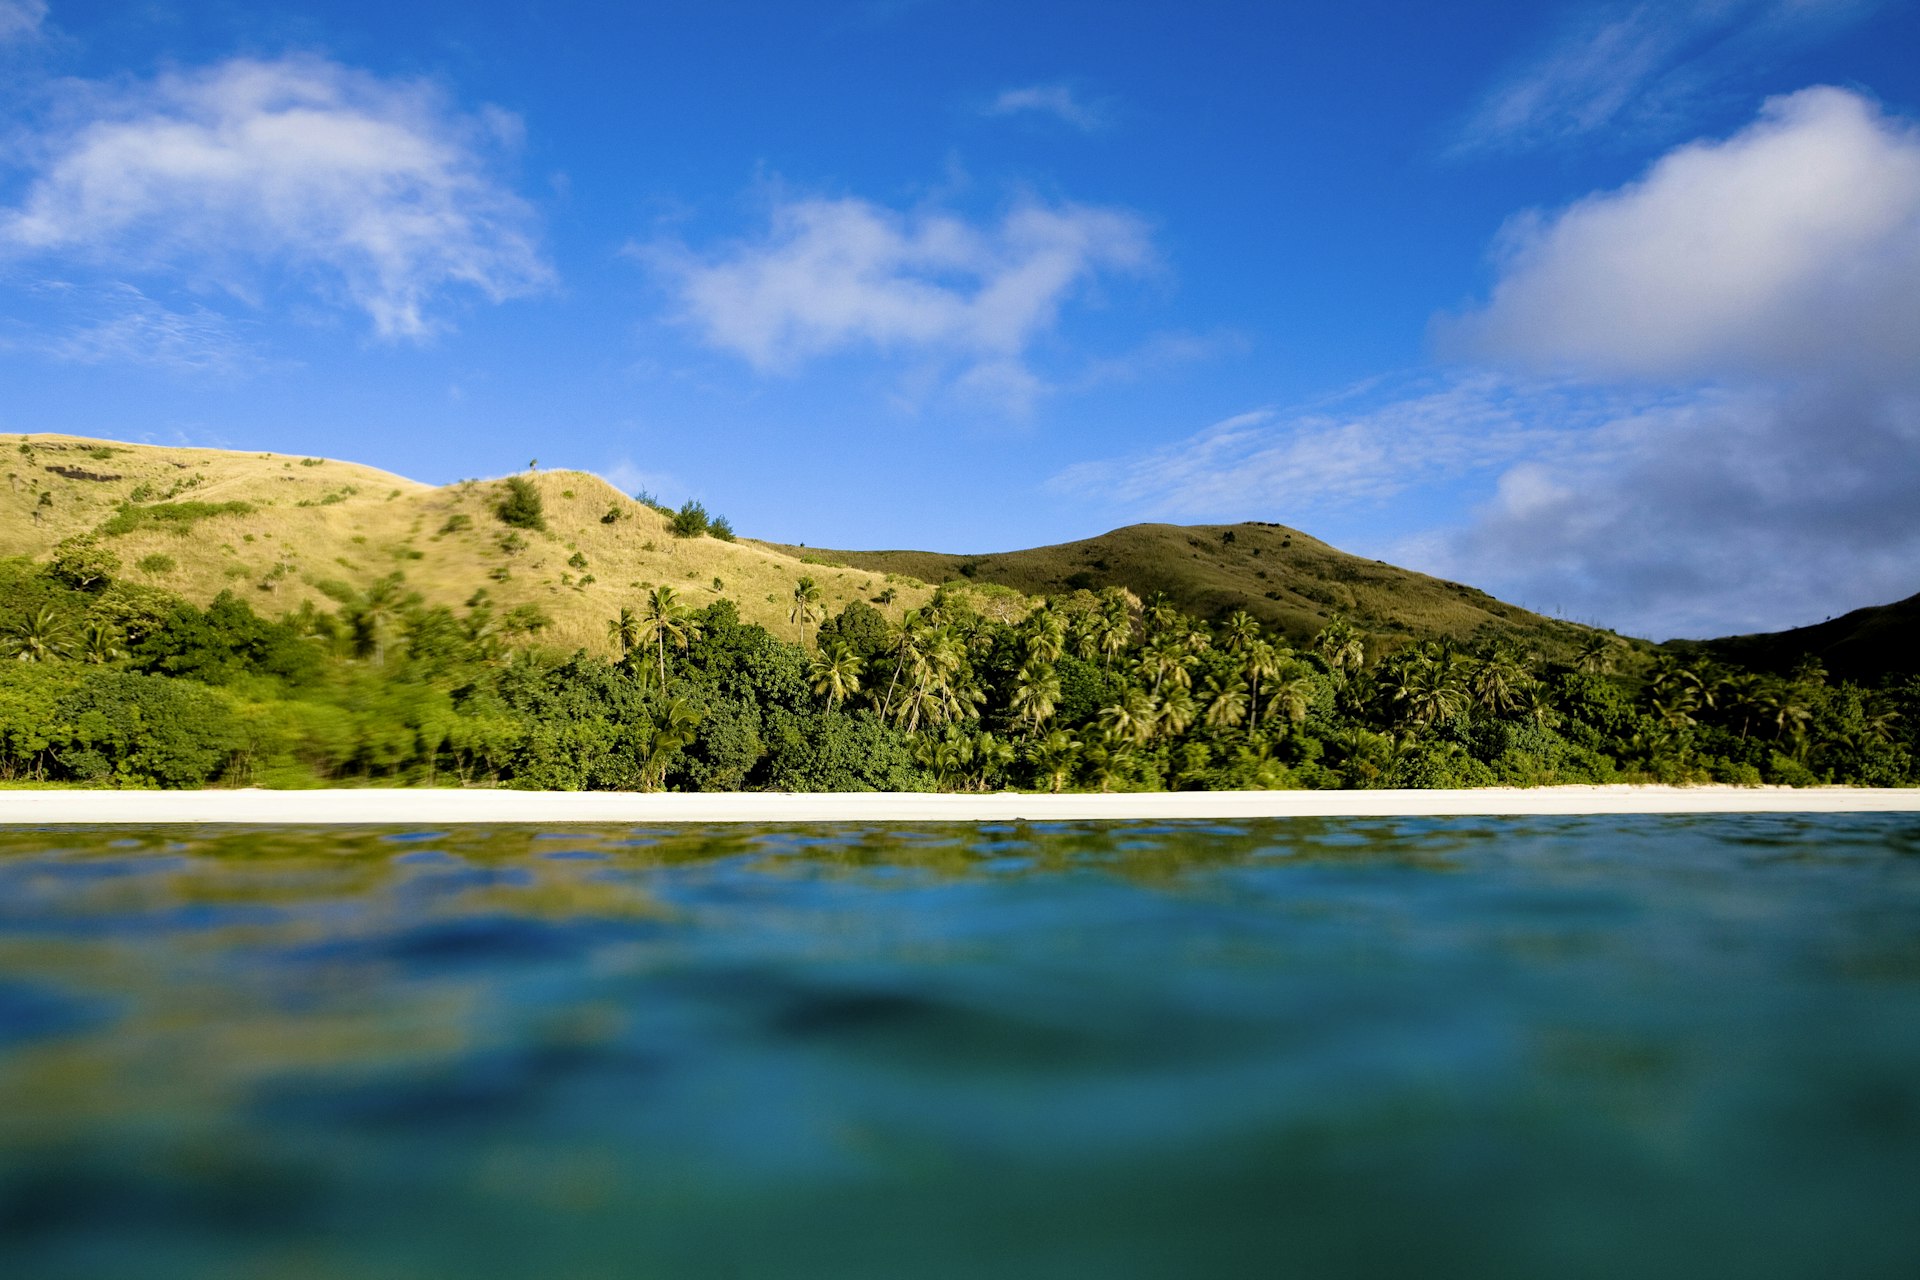 A view of the small island of Nacula, Fiji, from the water. The camera is just above the water level, meaning only a section of the white beach, lush forest and rolling hills of the island are visible.